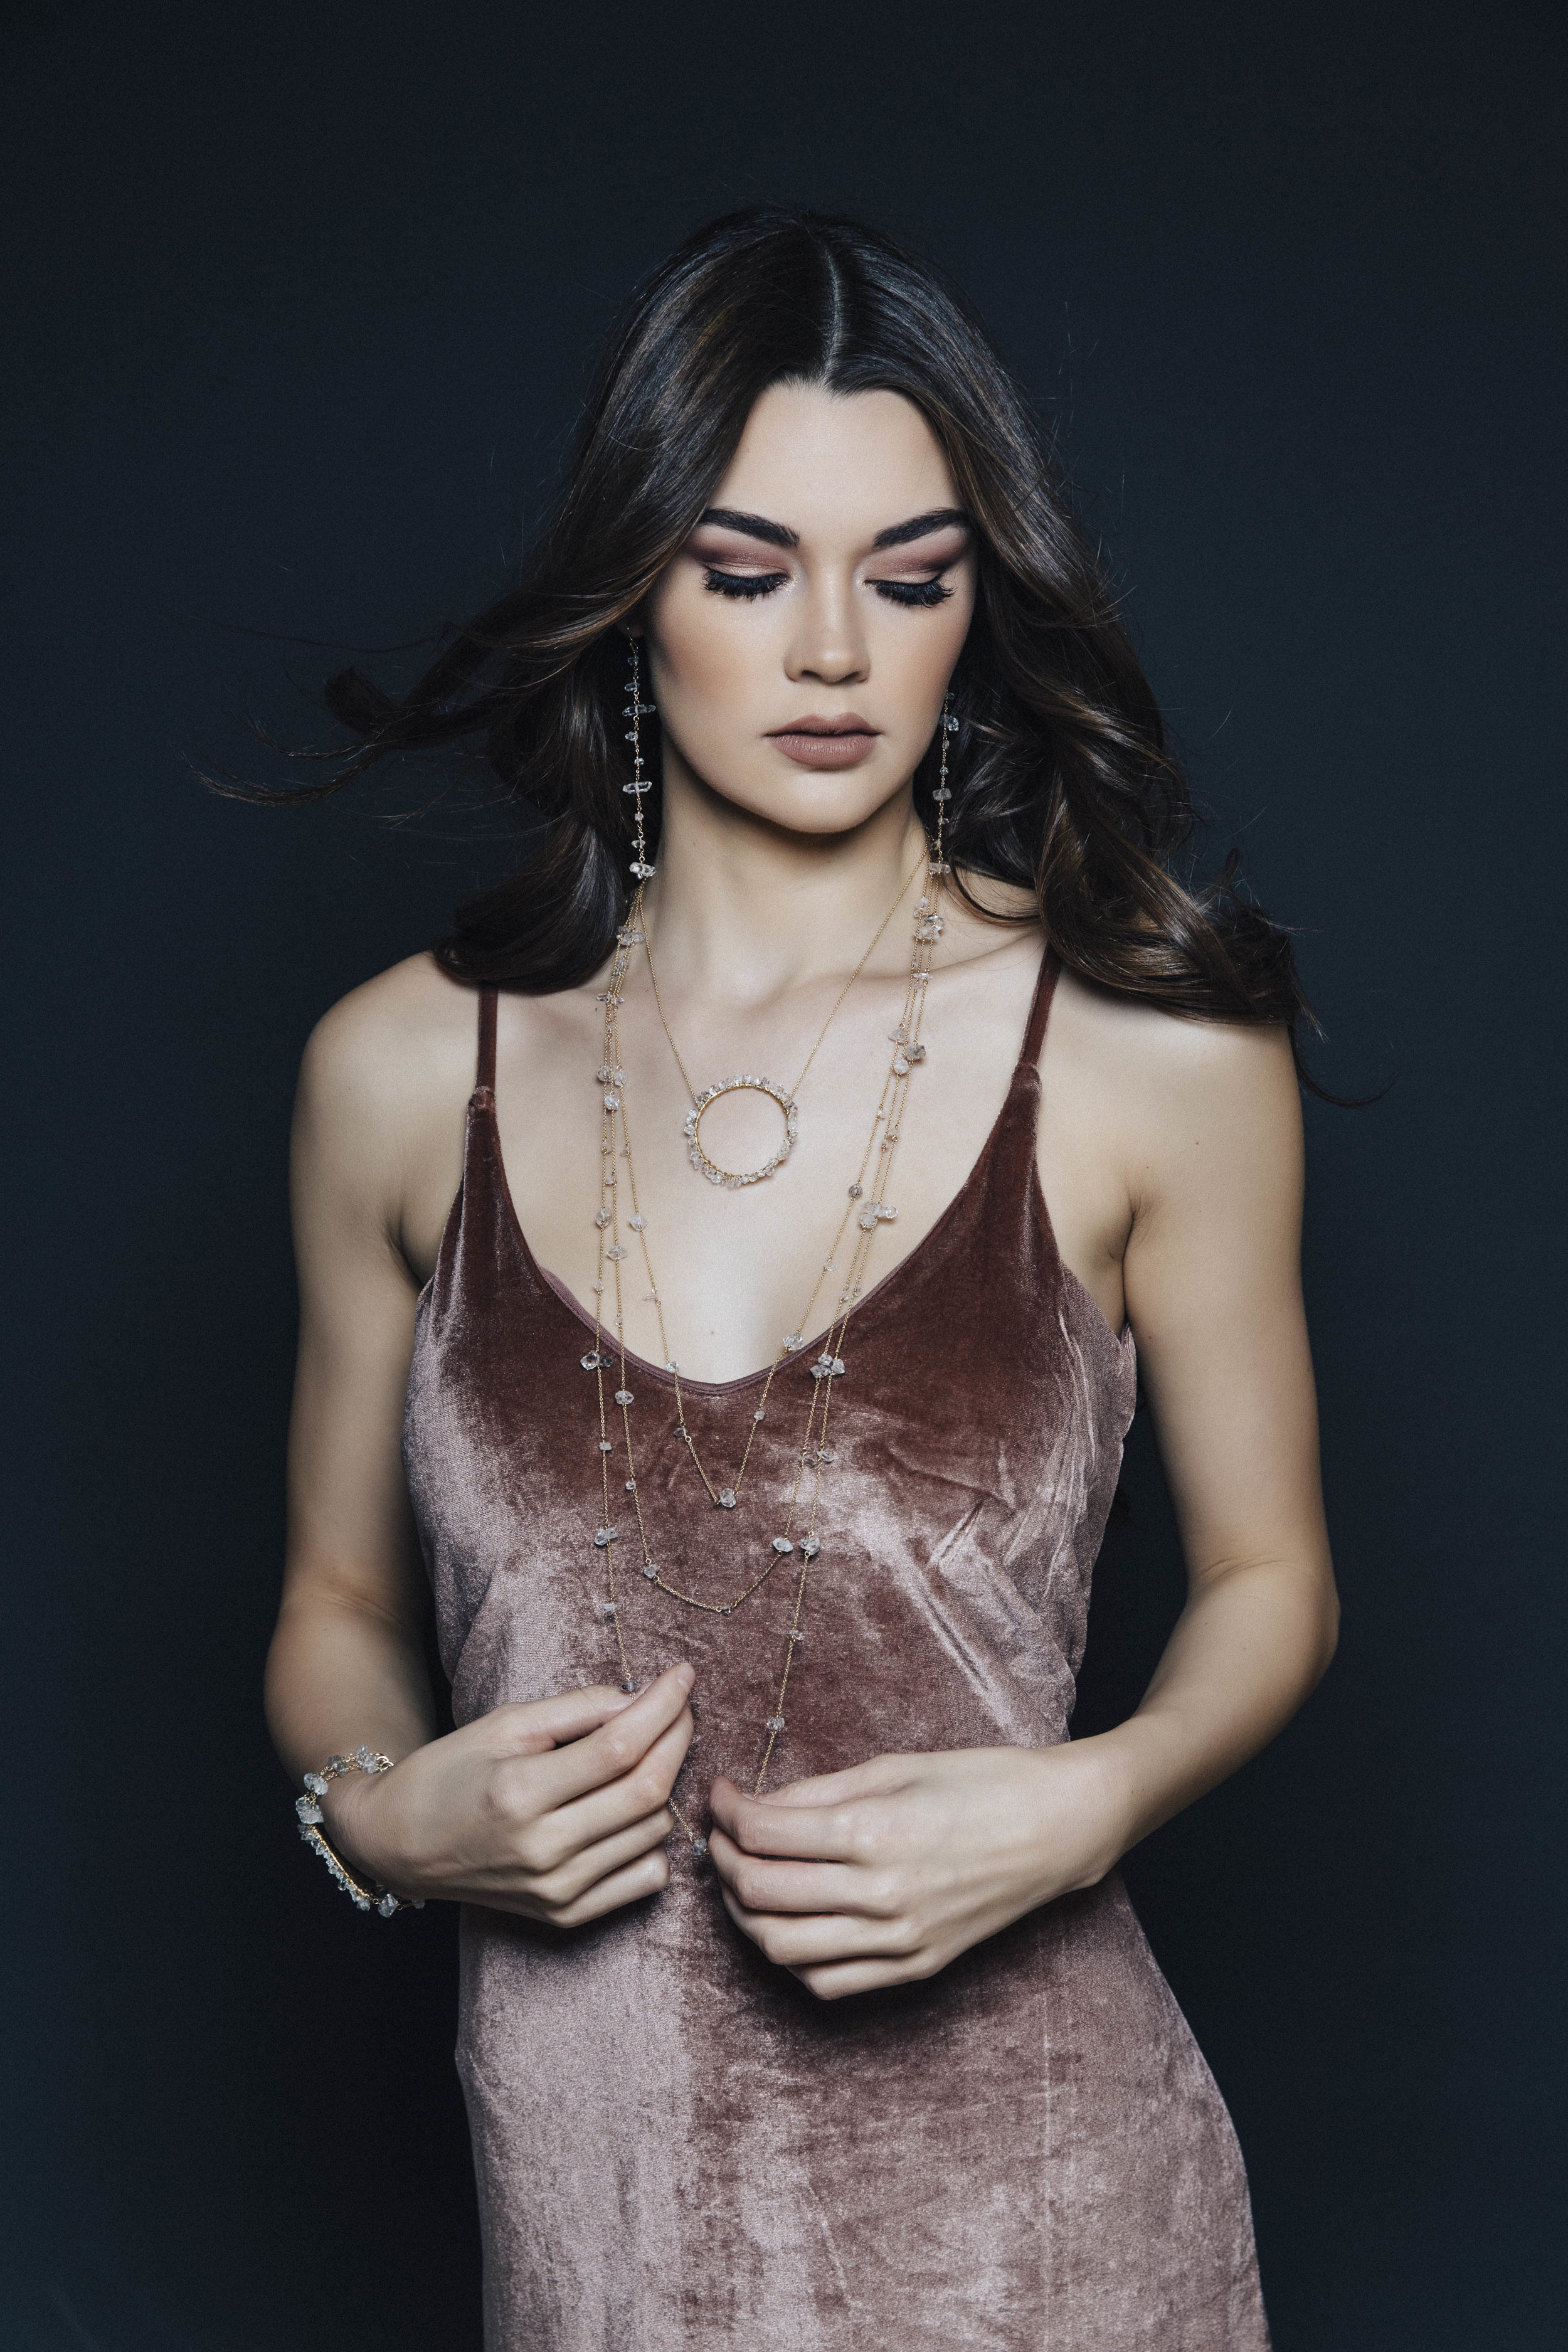 Model wearing herkimer diamond layering necklaces